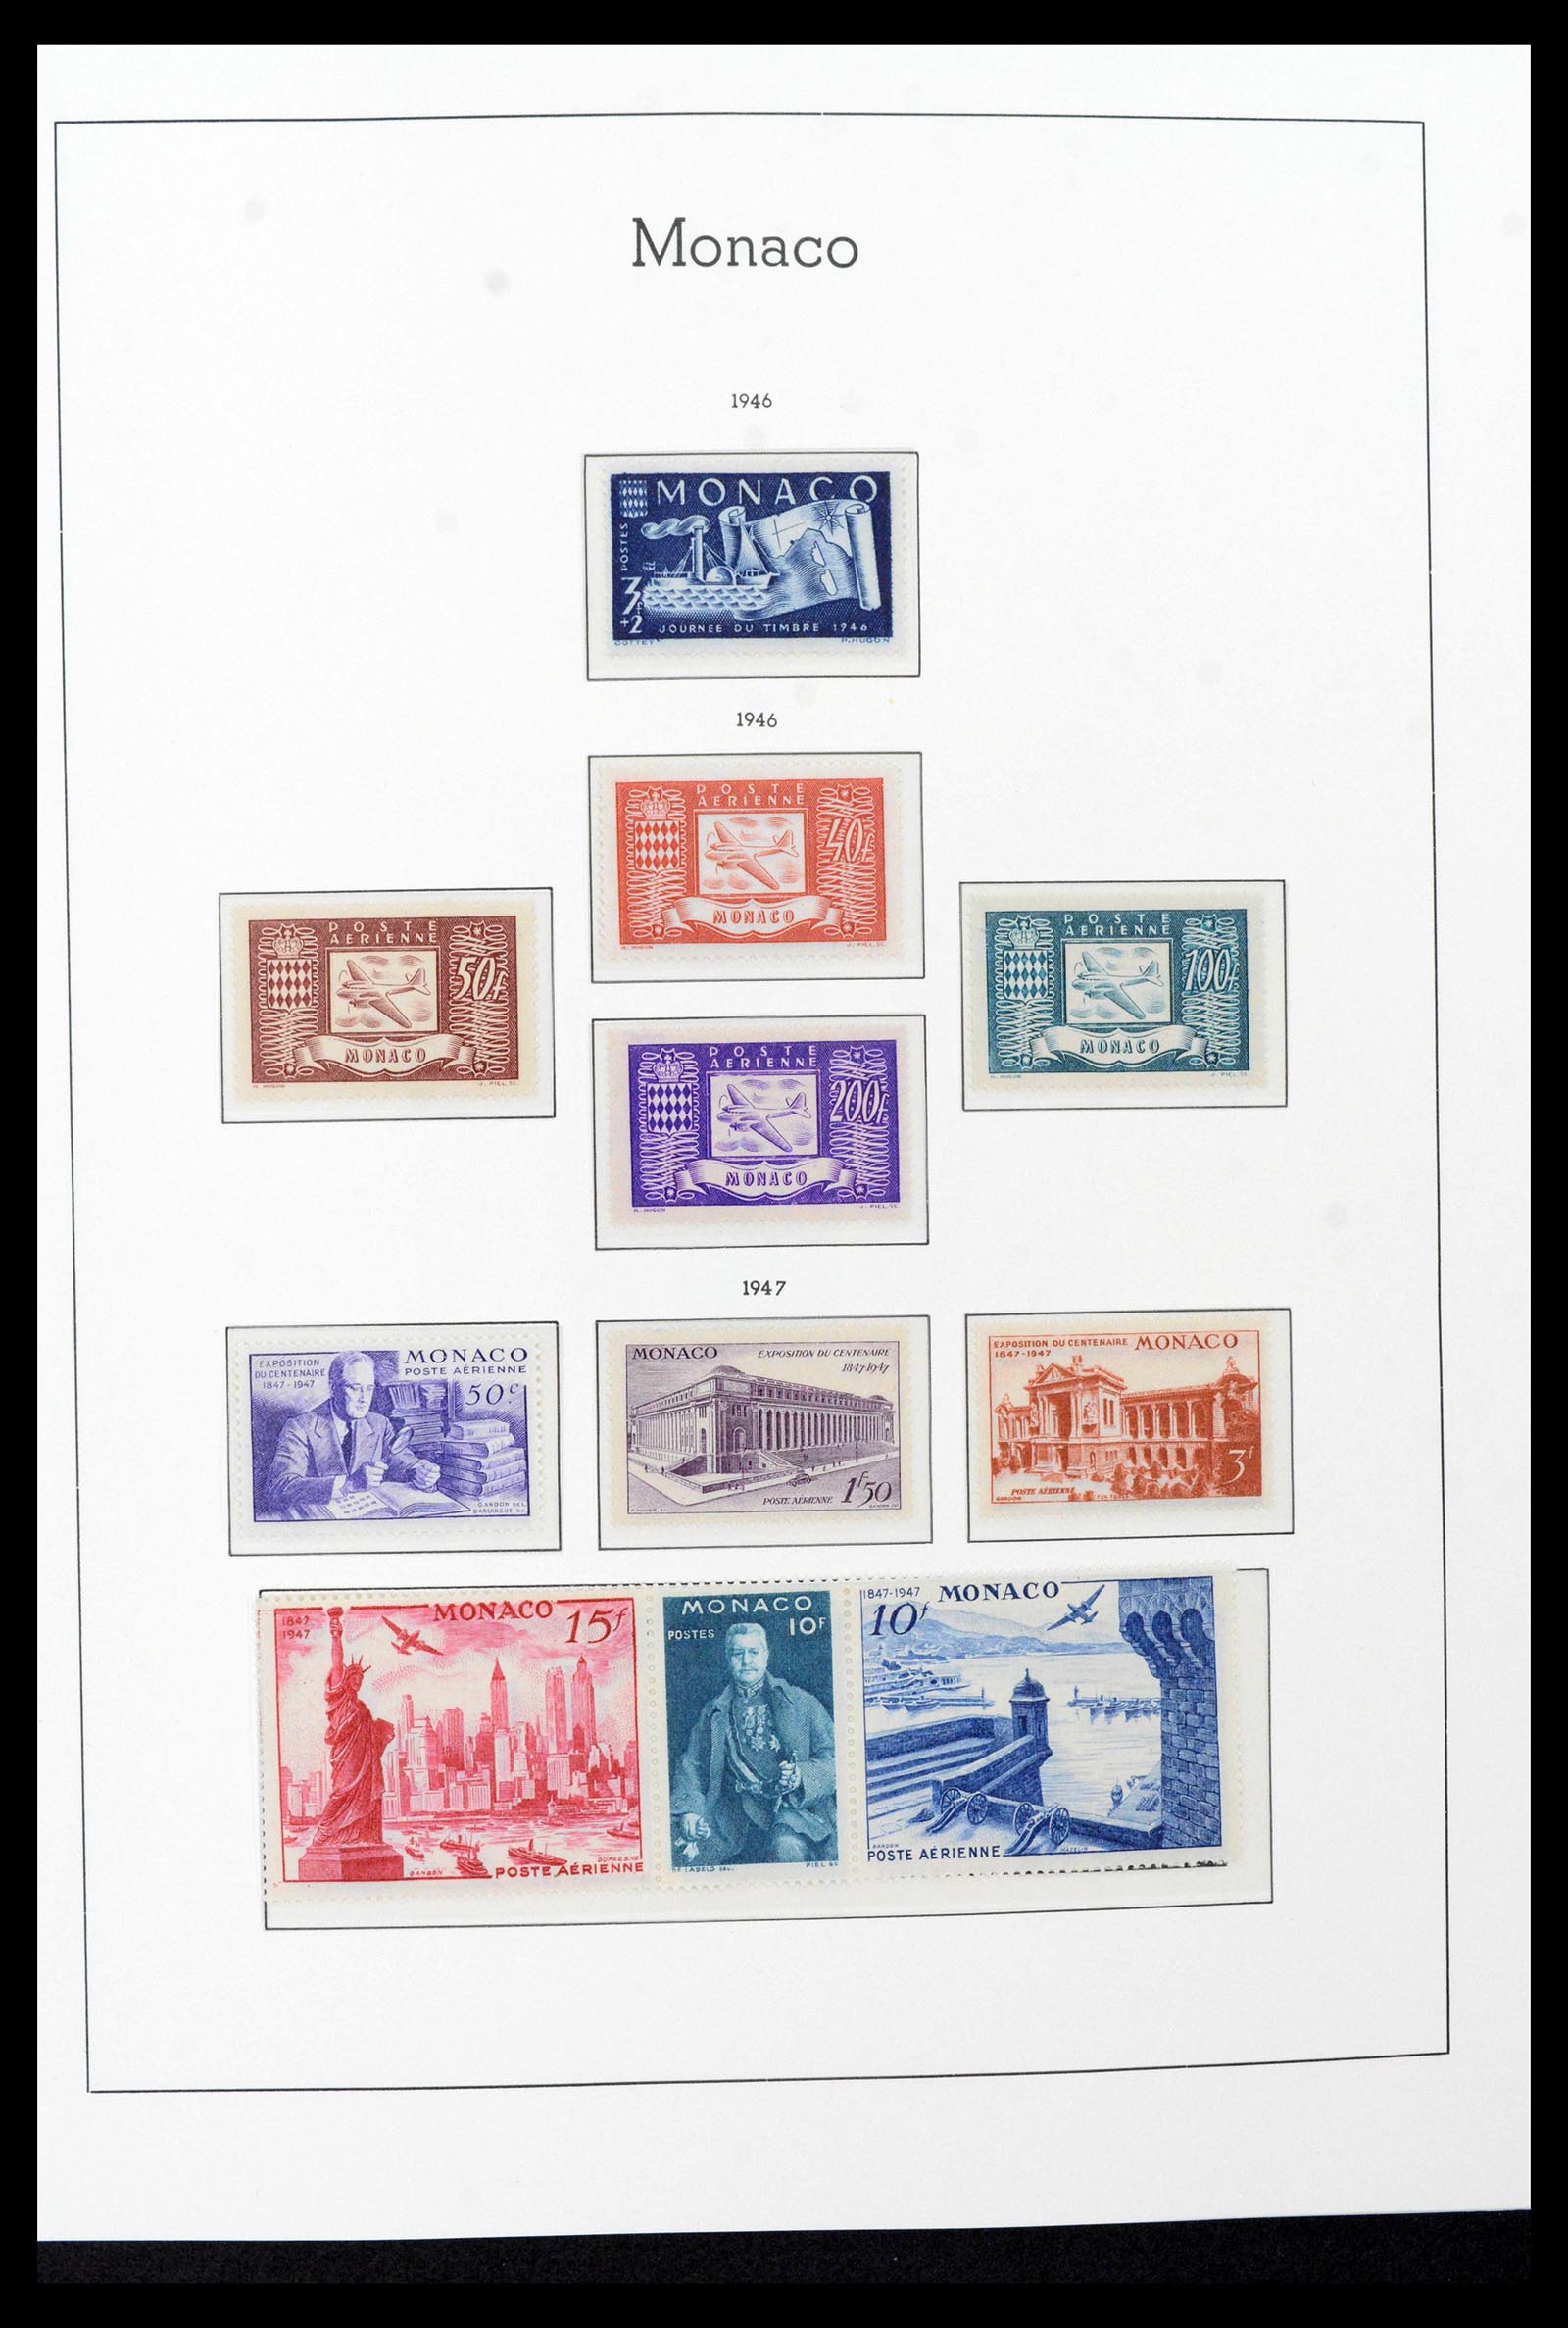 39390 0030 - Stamp collection 39390 Monaco complete 1885-1990.